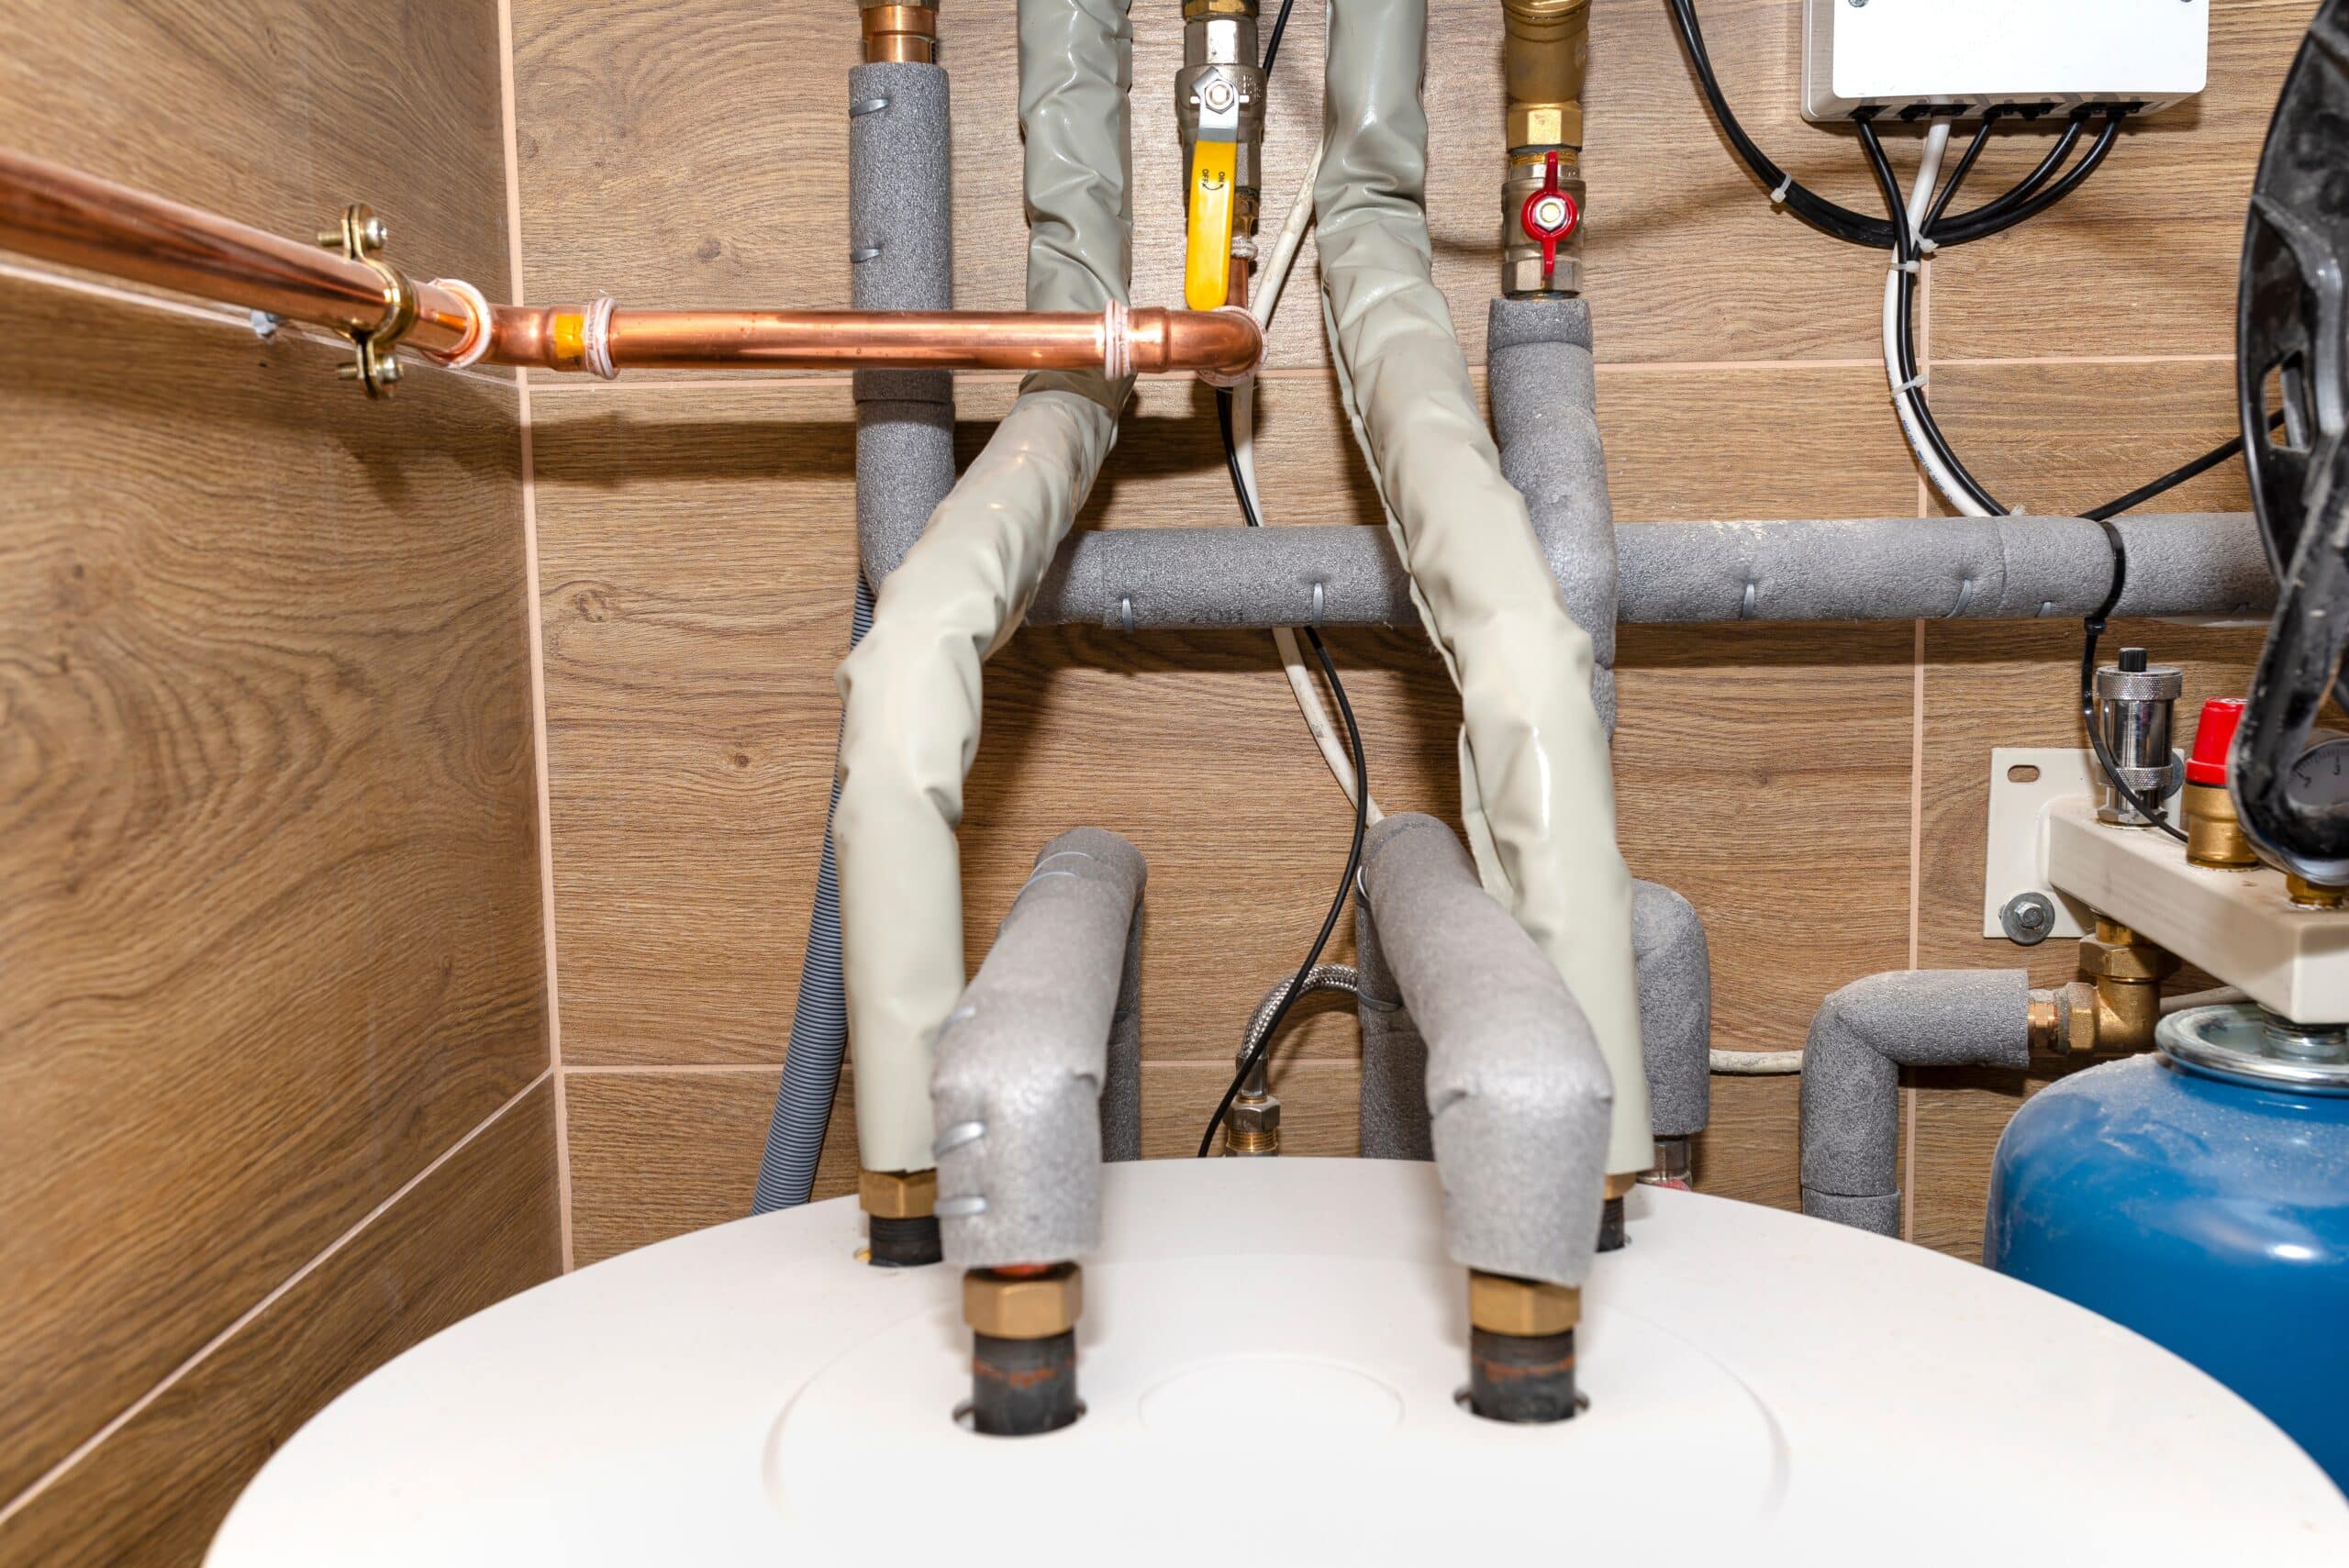 water tank and gas pipes for a modern gas boiler in a home boiler room, lined with ceramic tiles.